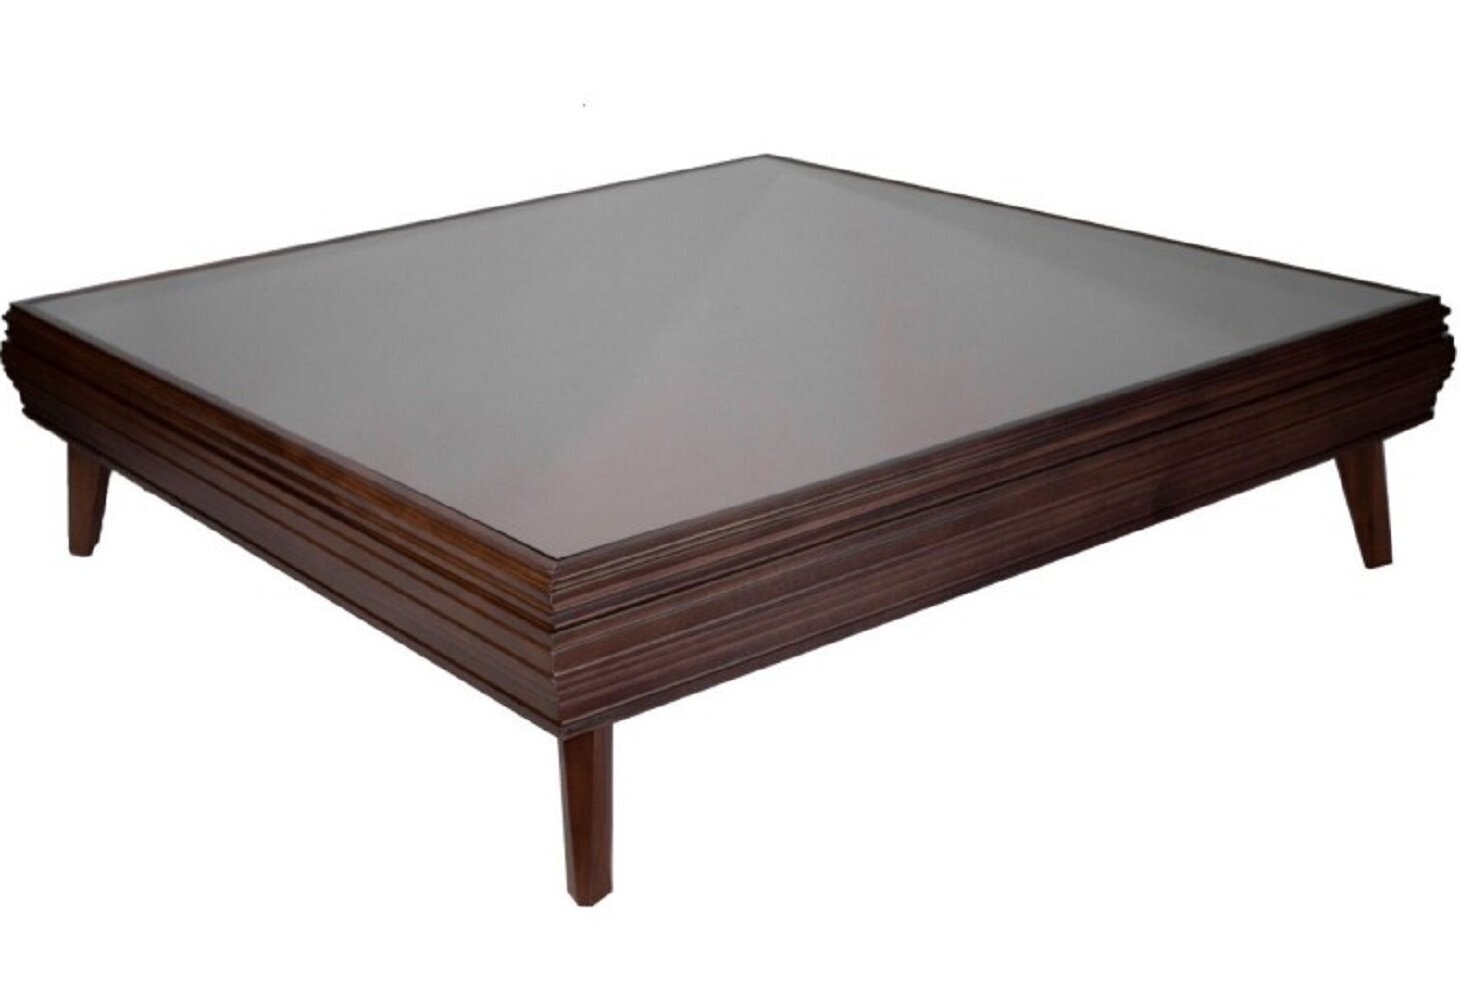 Large Square Coffee Table With Mirrored Top